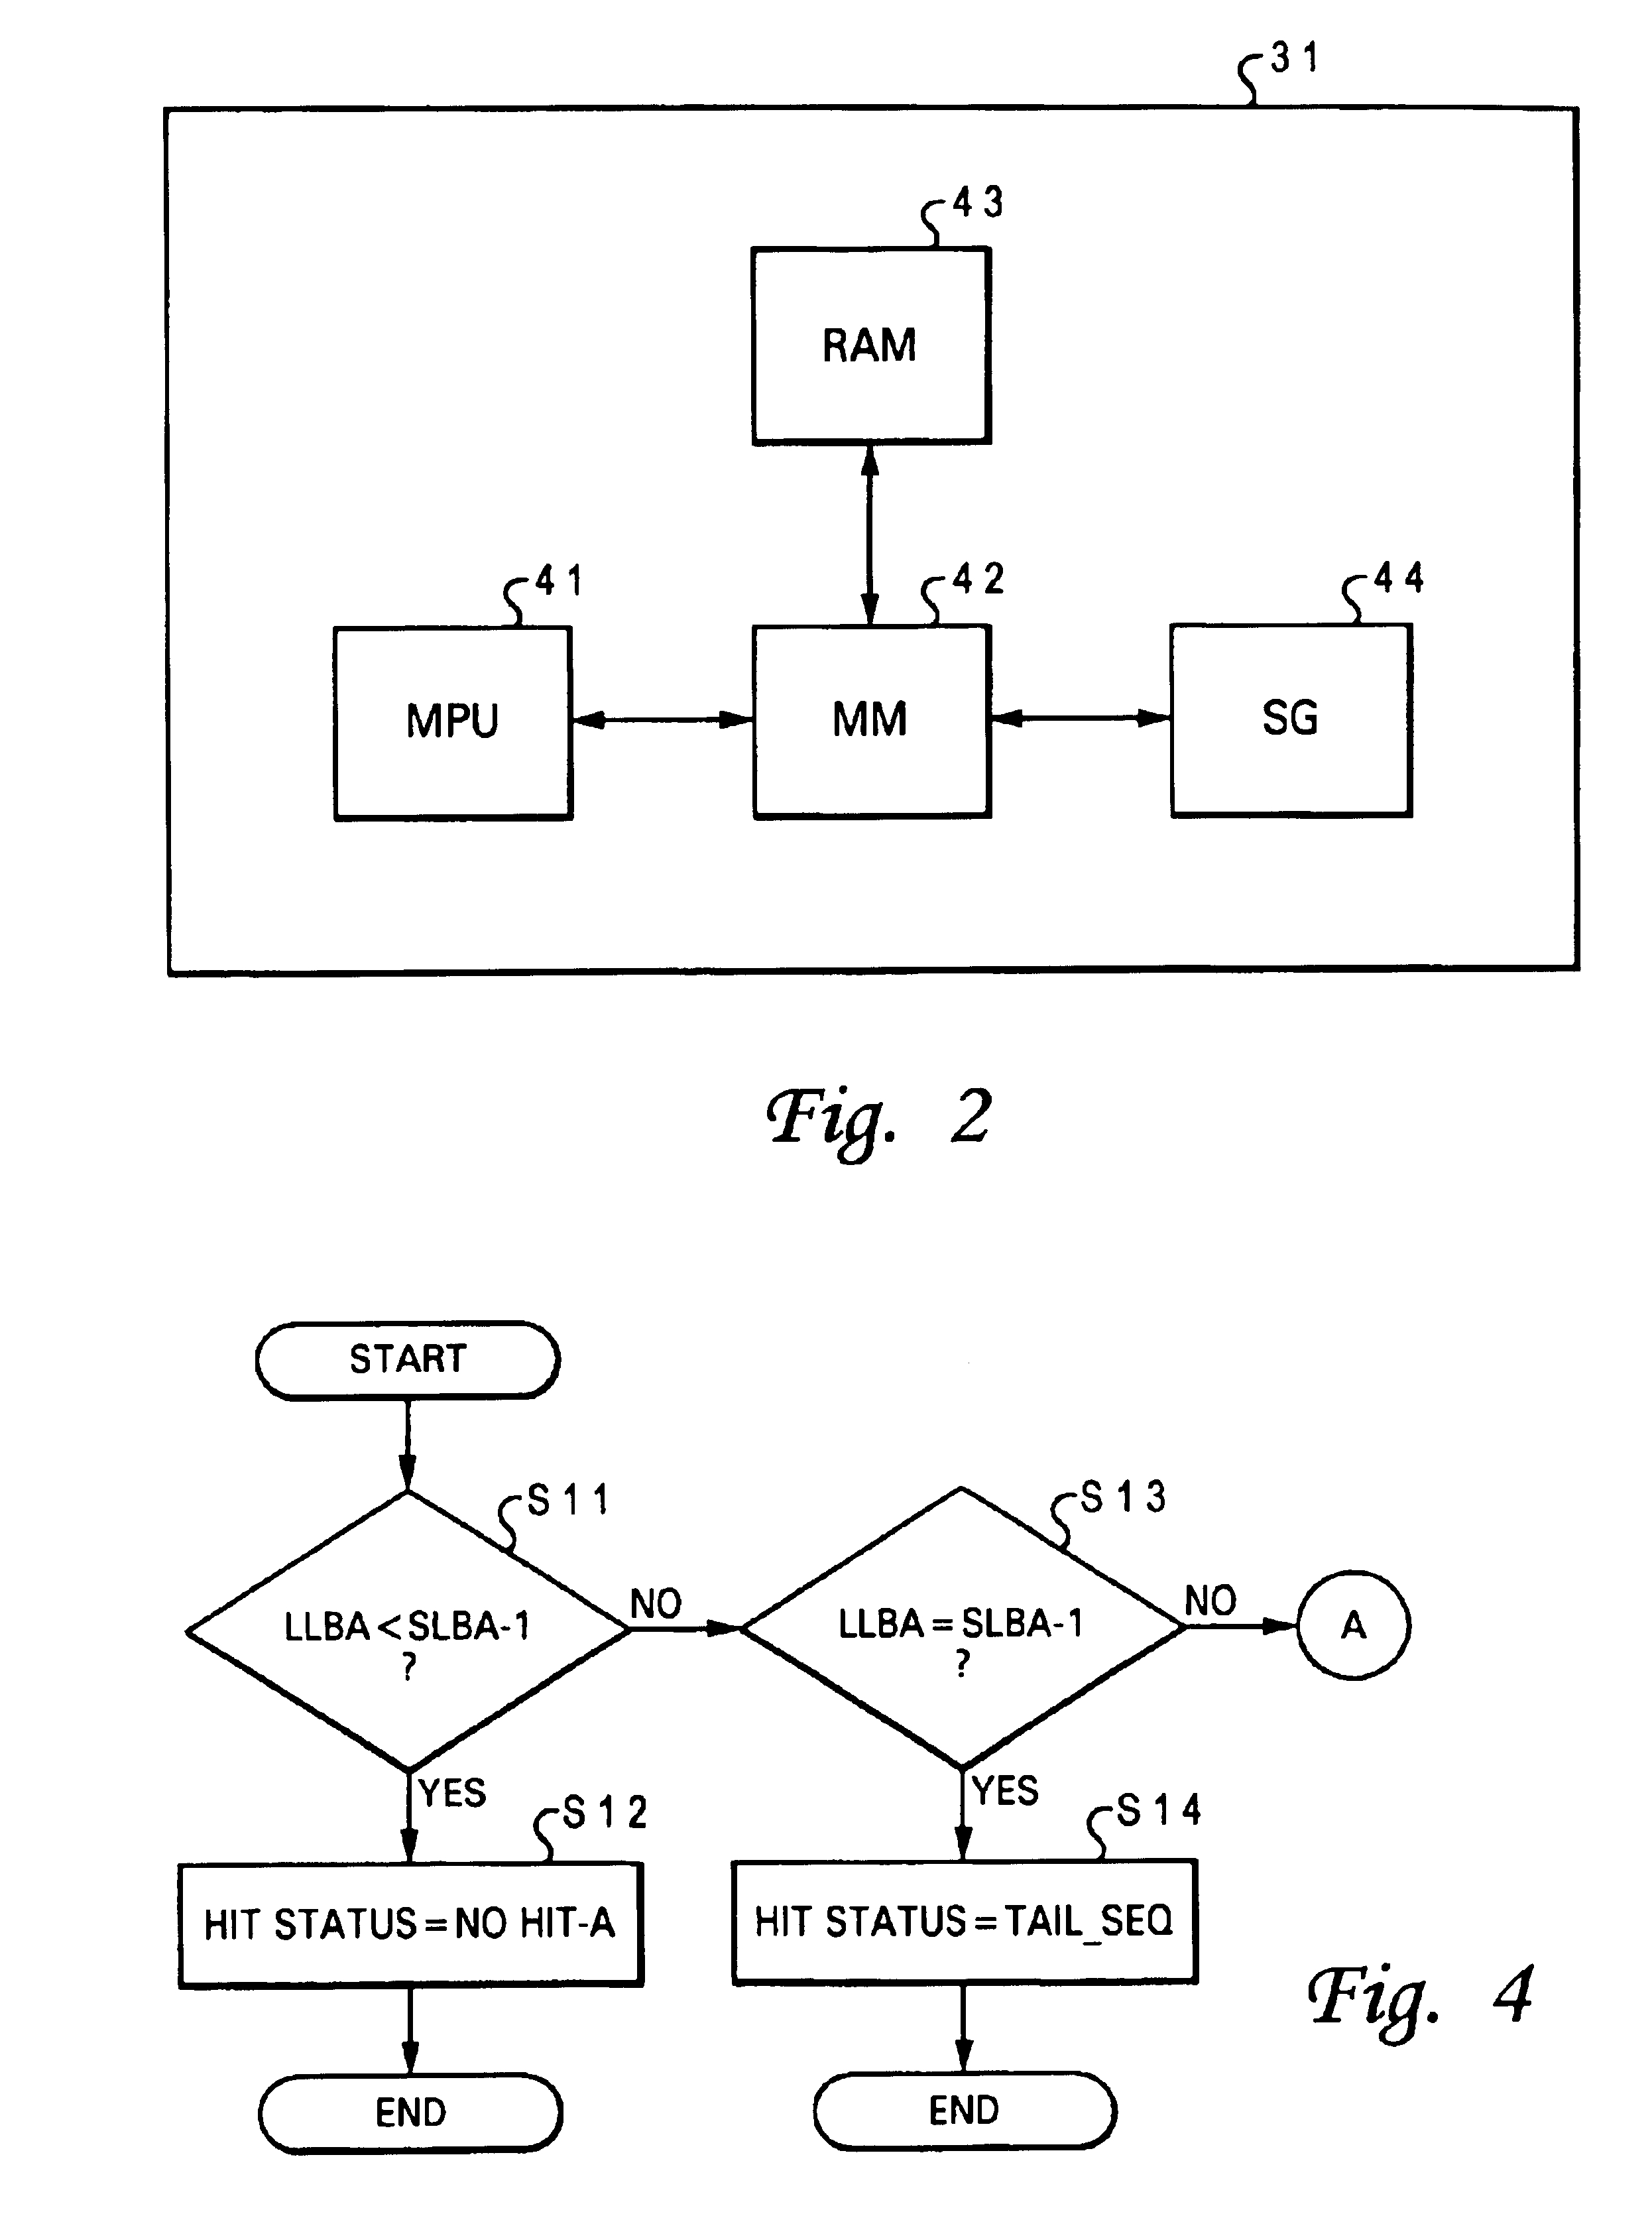 System and method of implementing a buffer memory and hard disk drive write controller